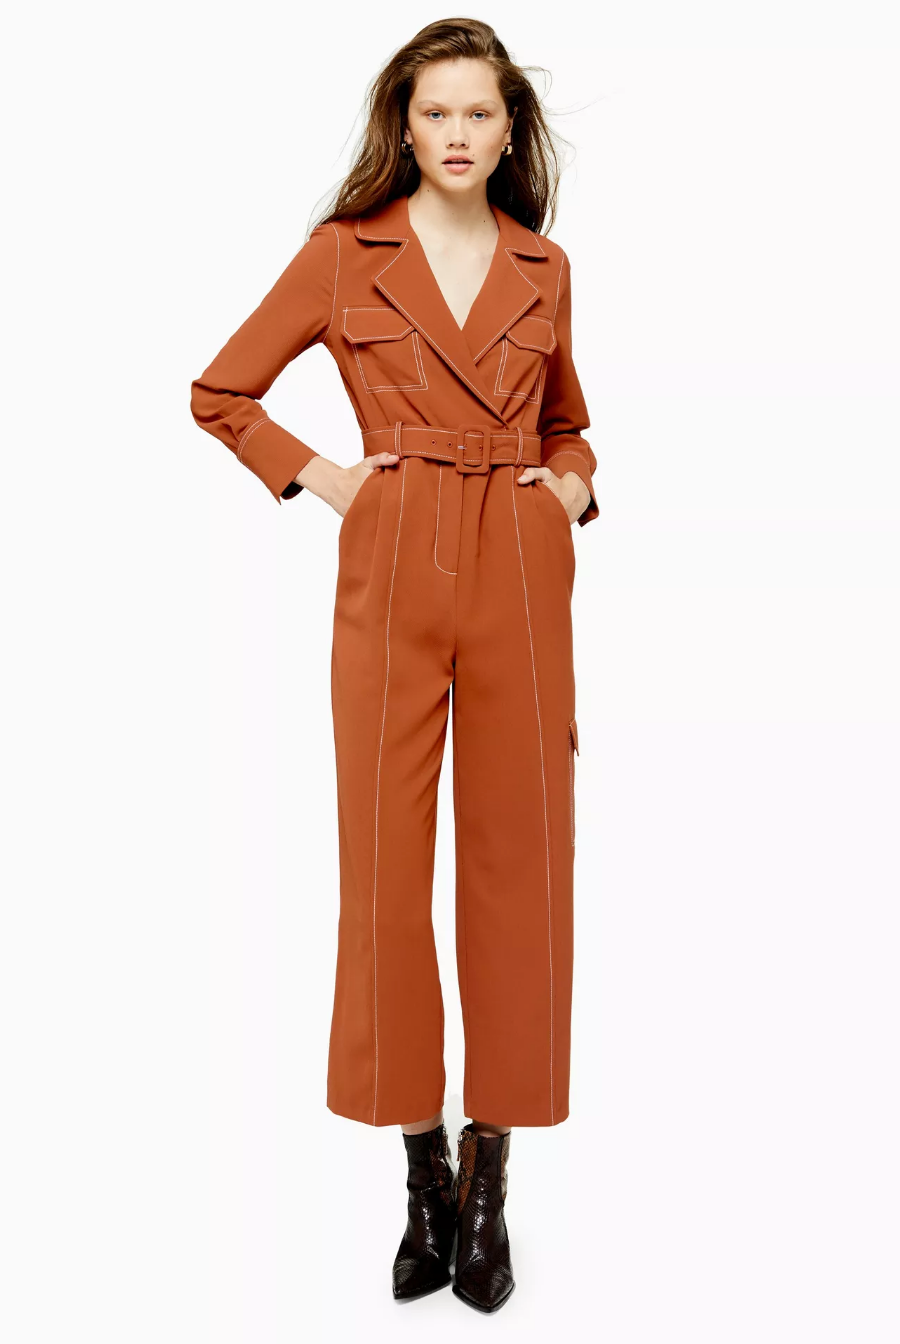 Take The Stress Out Of Your Morning With These Chic Jumpsuits